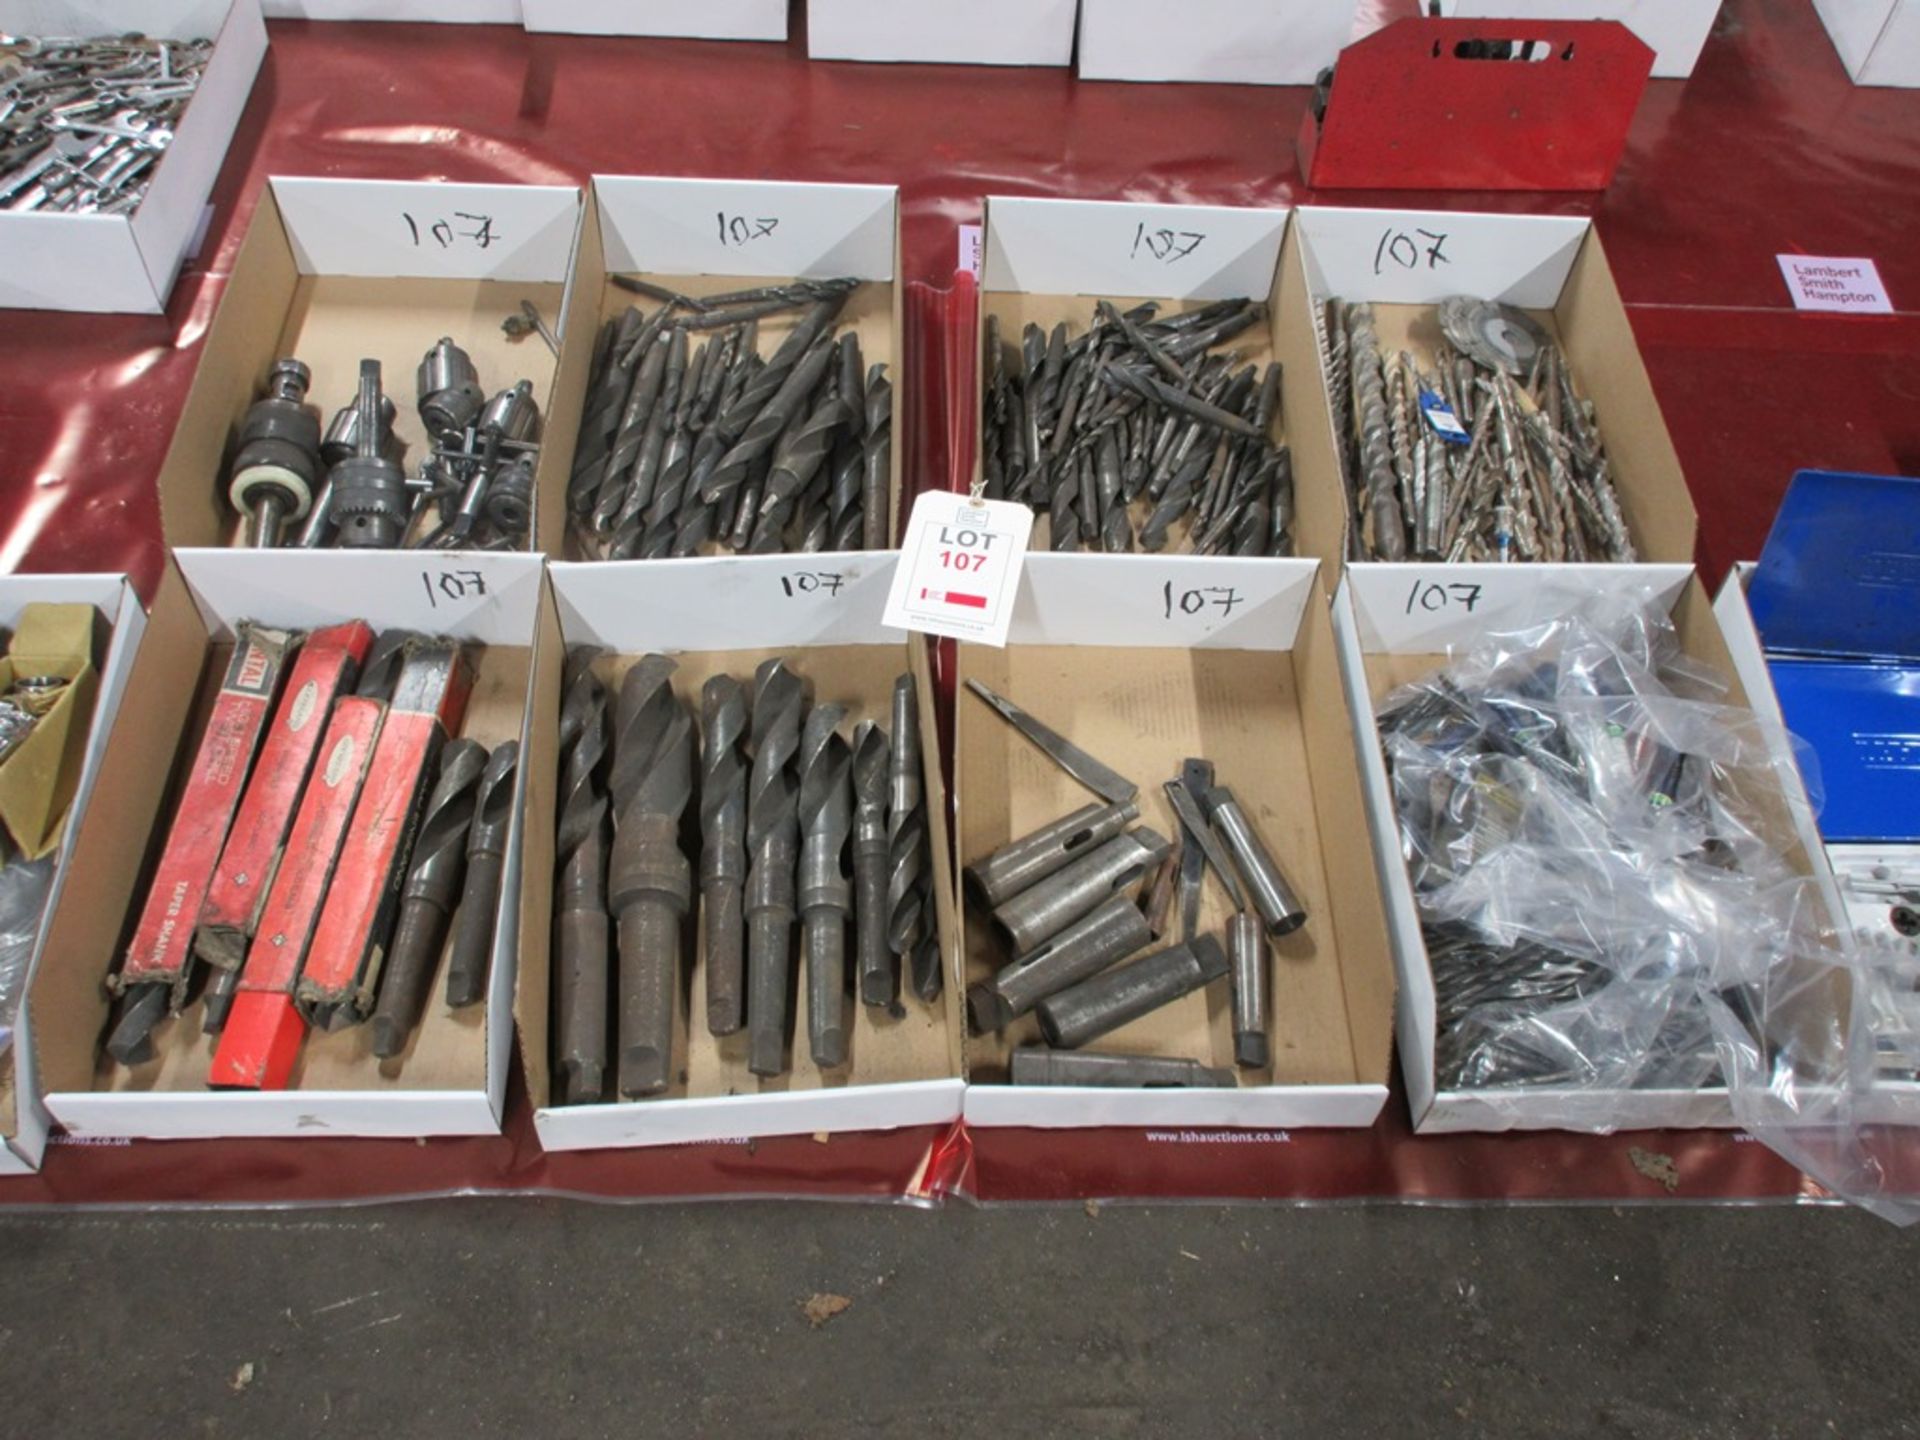 Quantity of assorted drill bits, sleeves, chucks, etc., as lotted